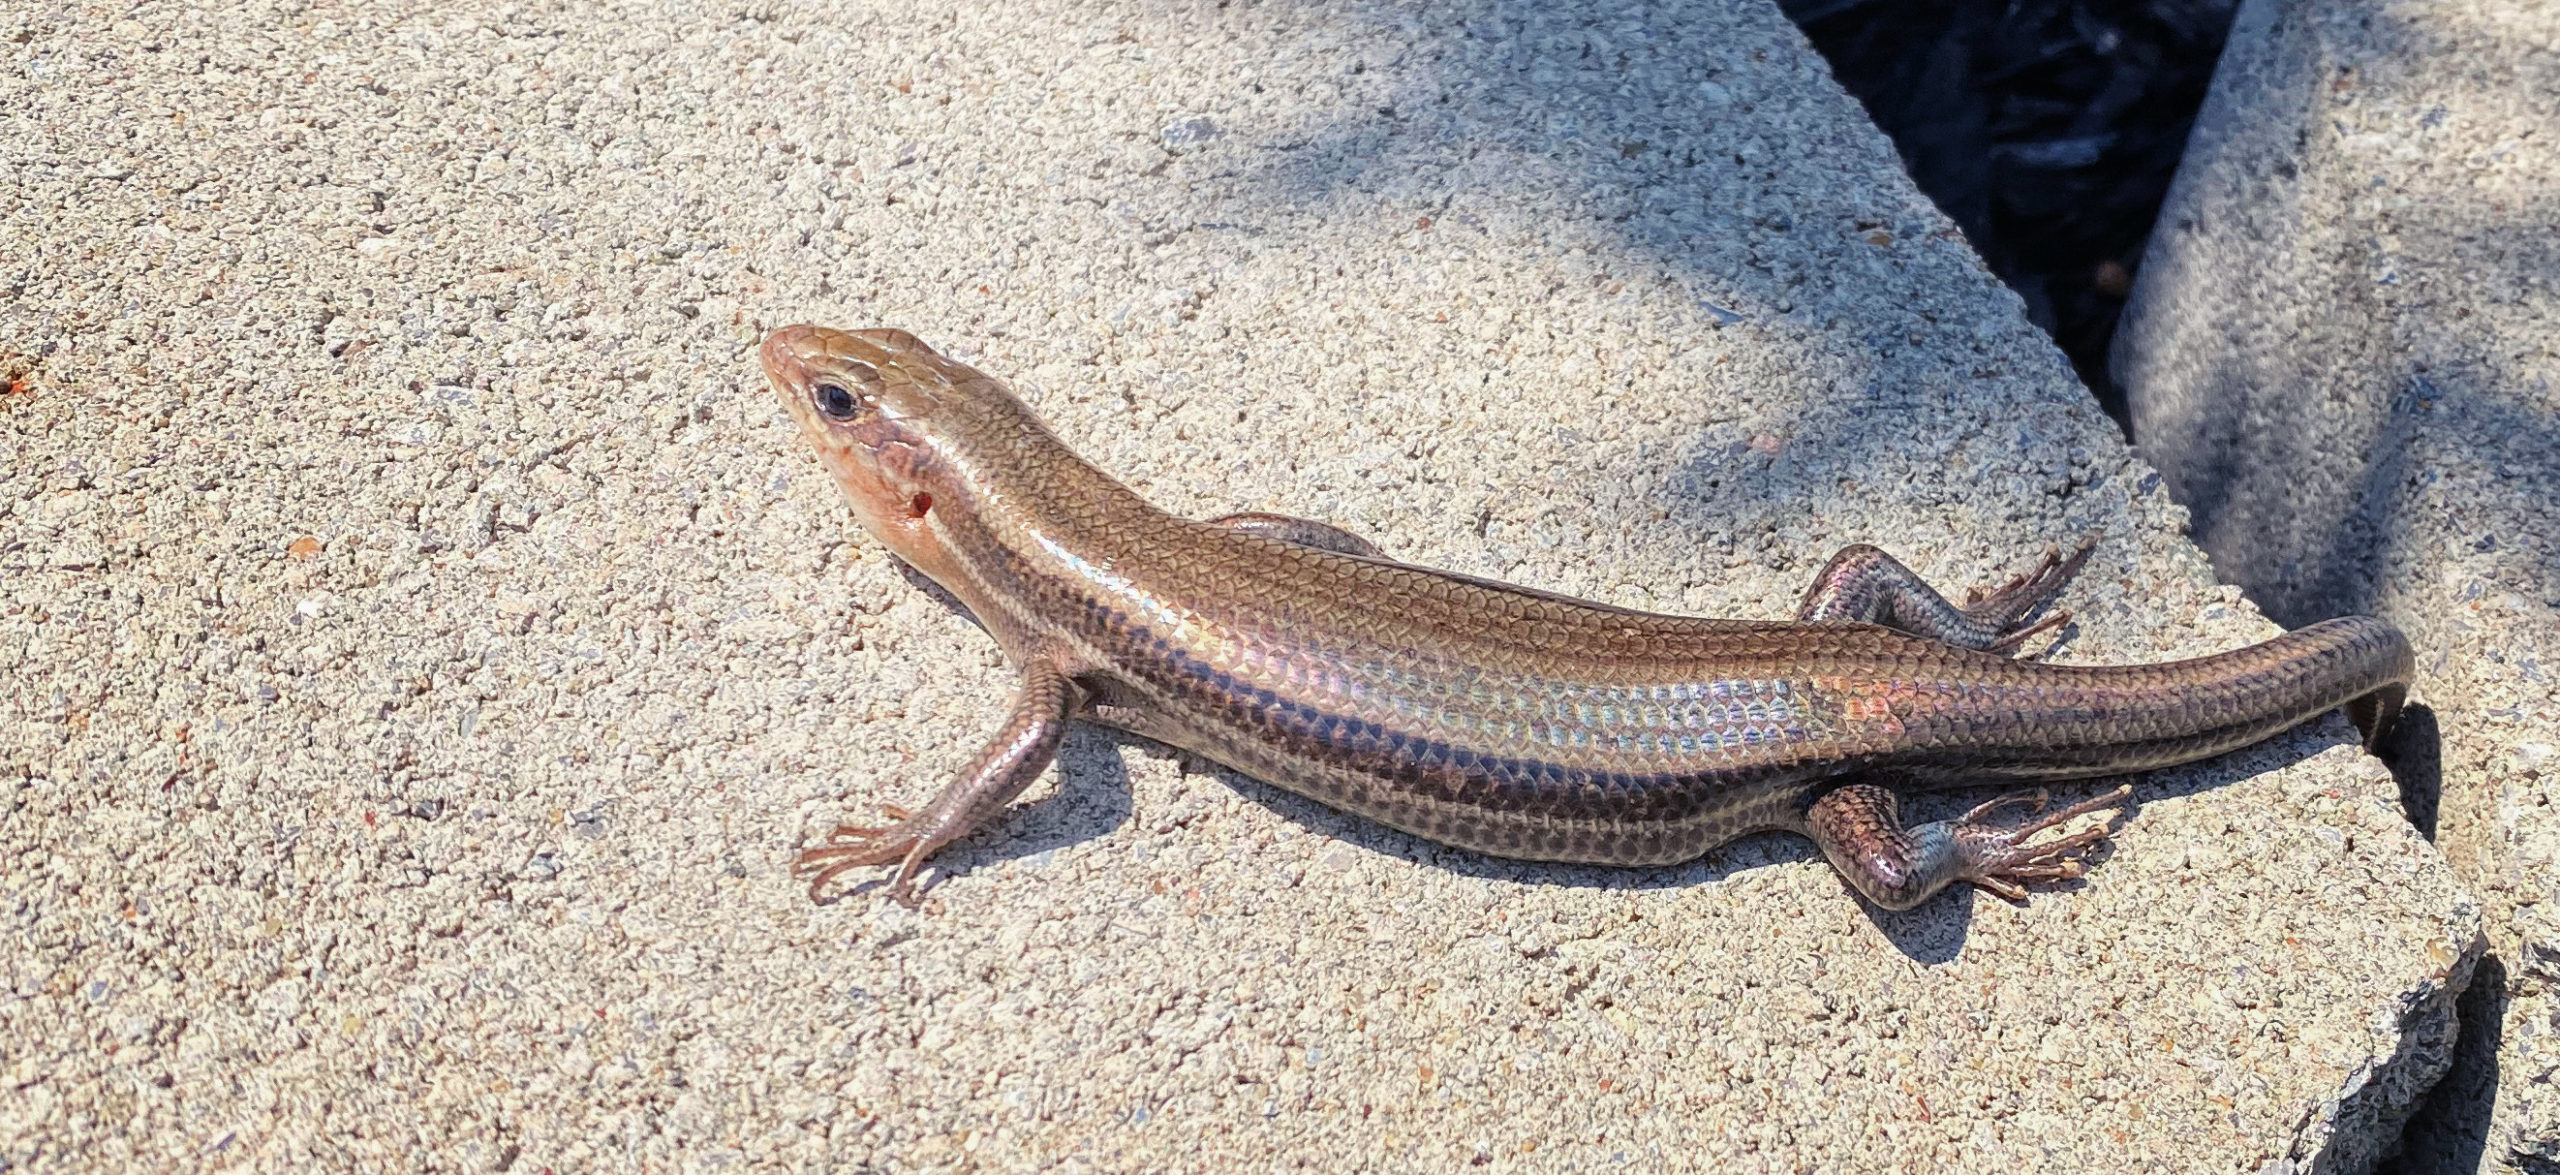 A side-on view of a larger brown lizard with a rainbow sheen sunning itself on a concrete block.